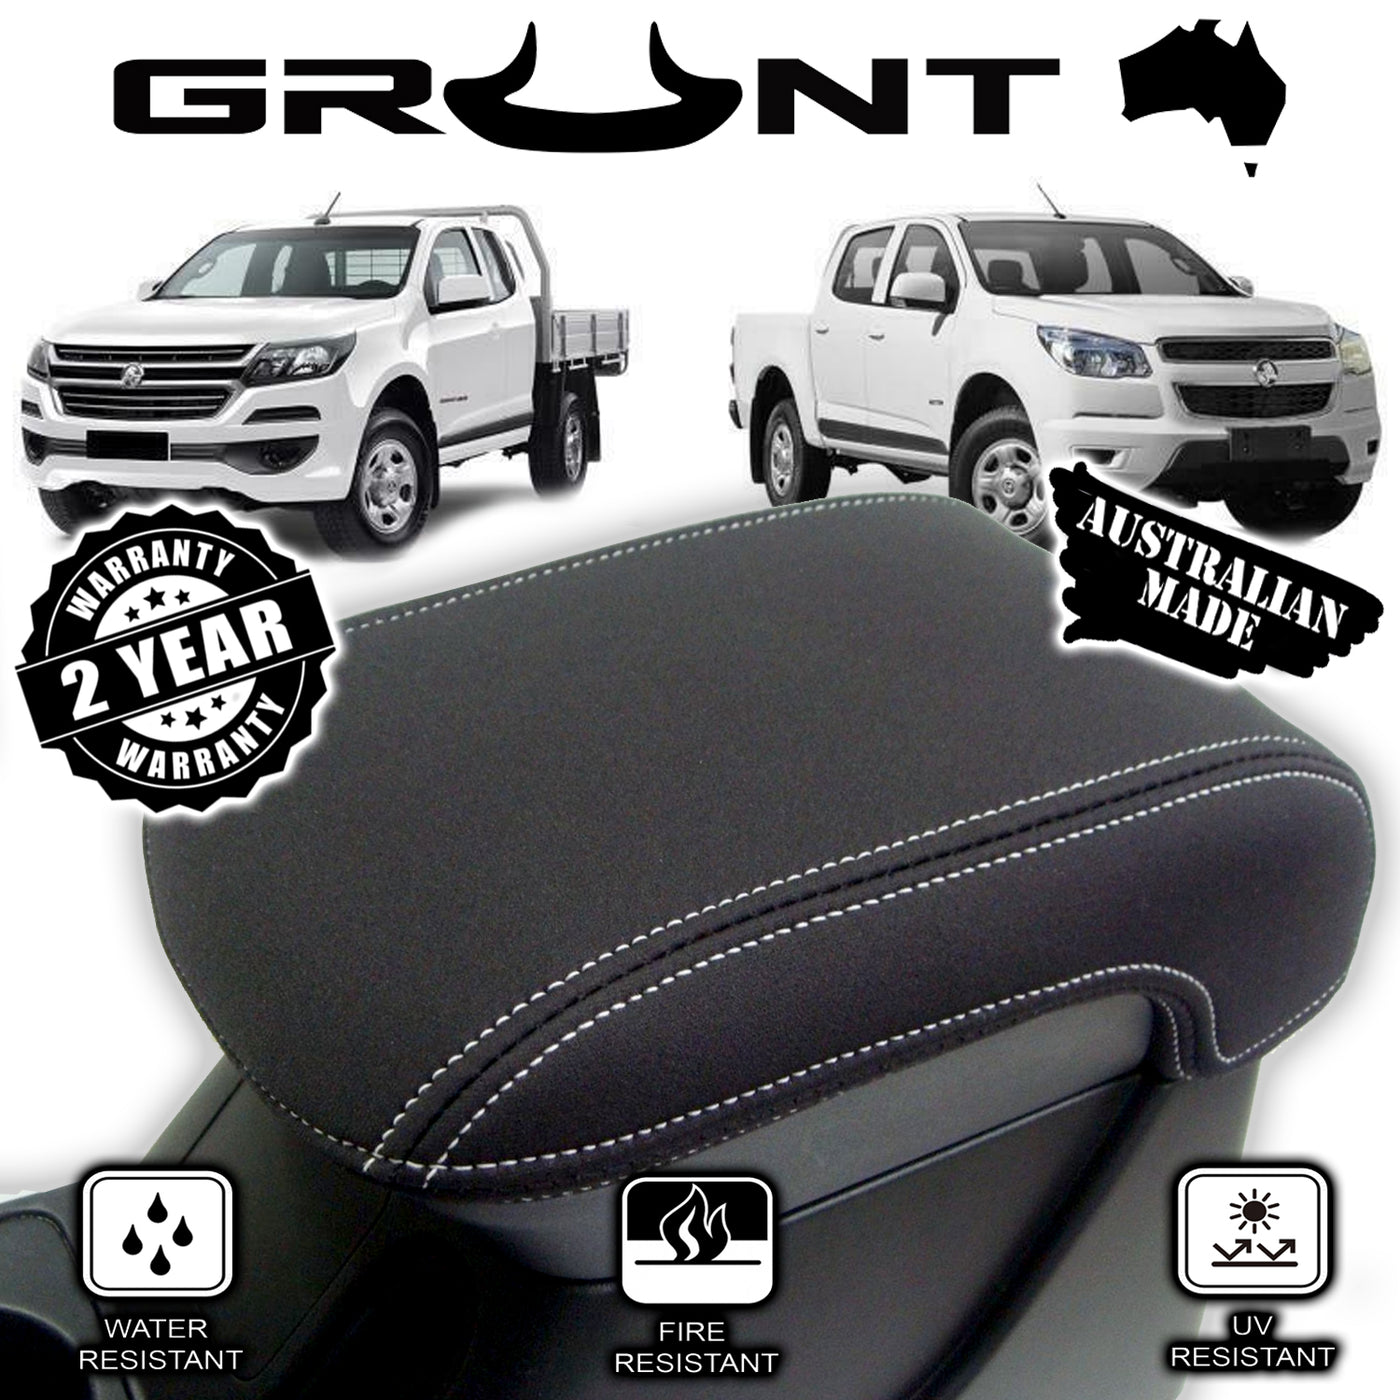 Holden Colorado RG neoprene centre console lid cover wetsuit material 2012-2019